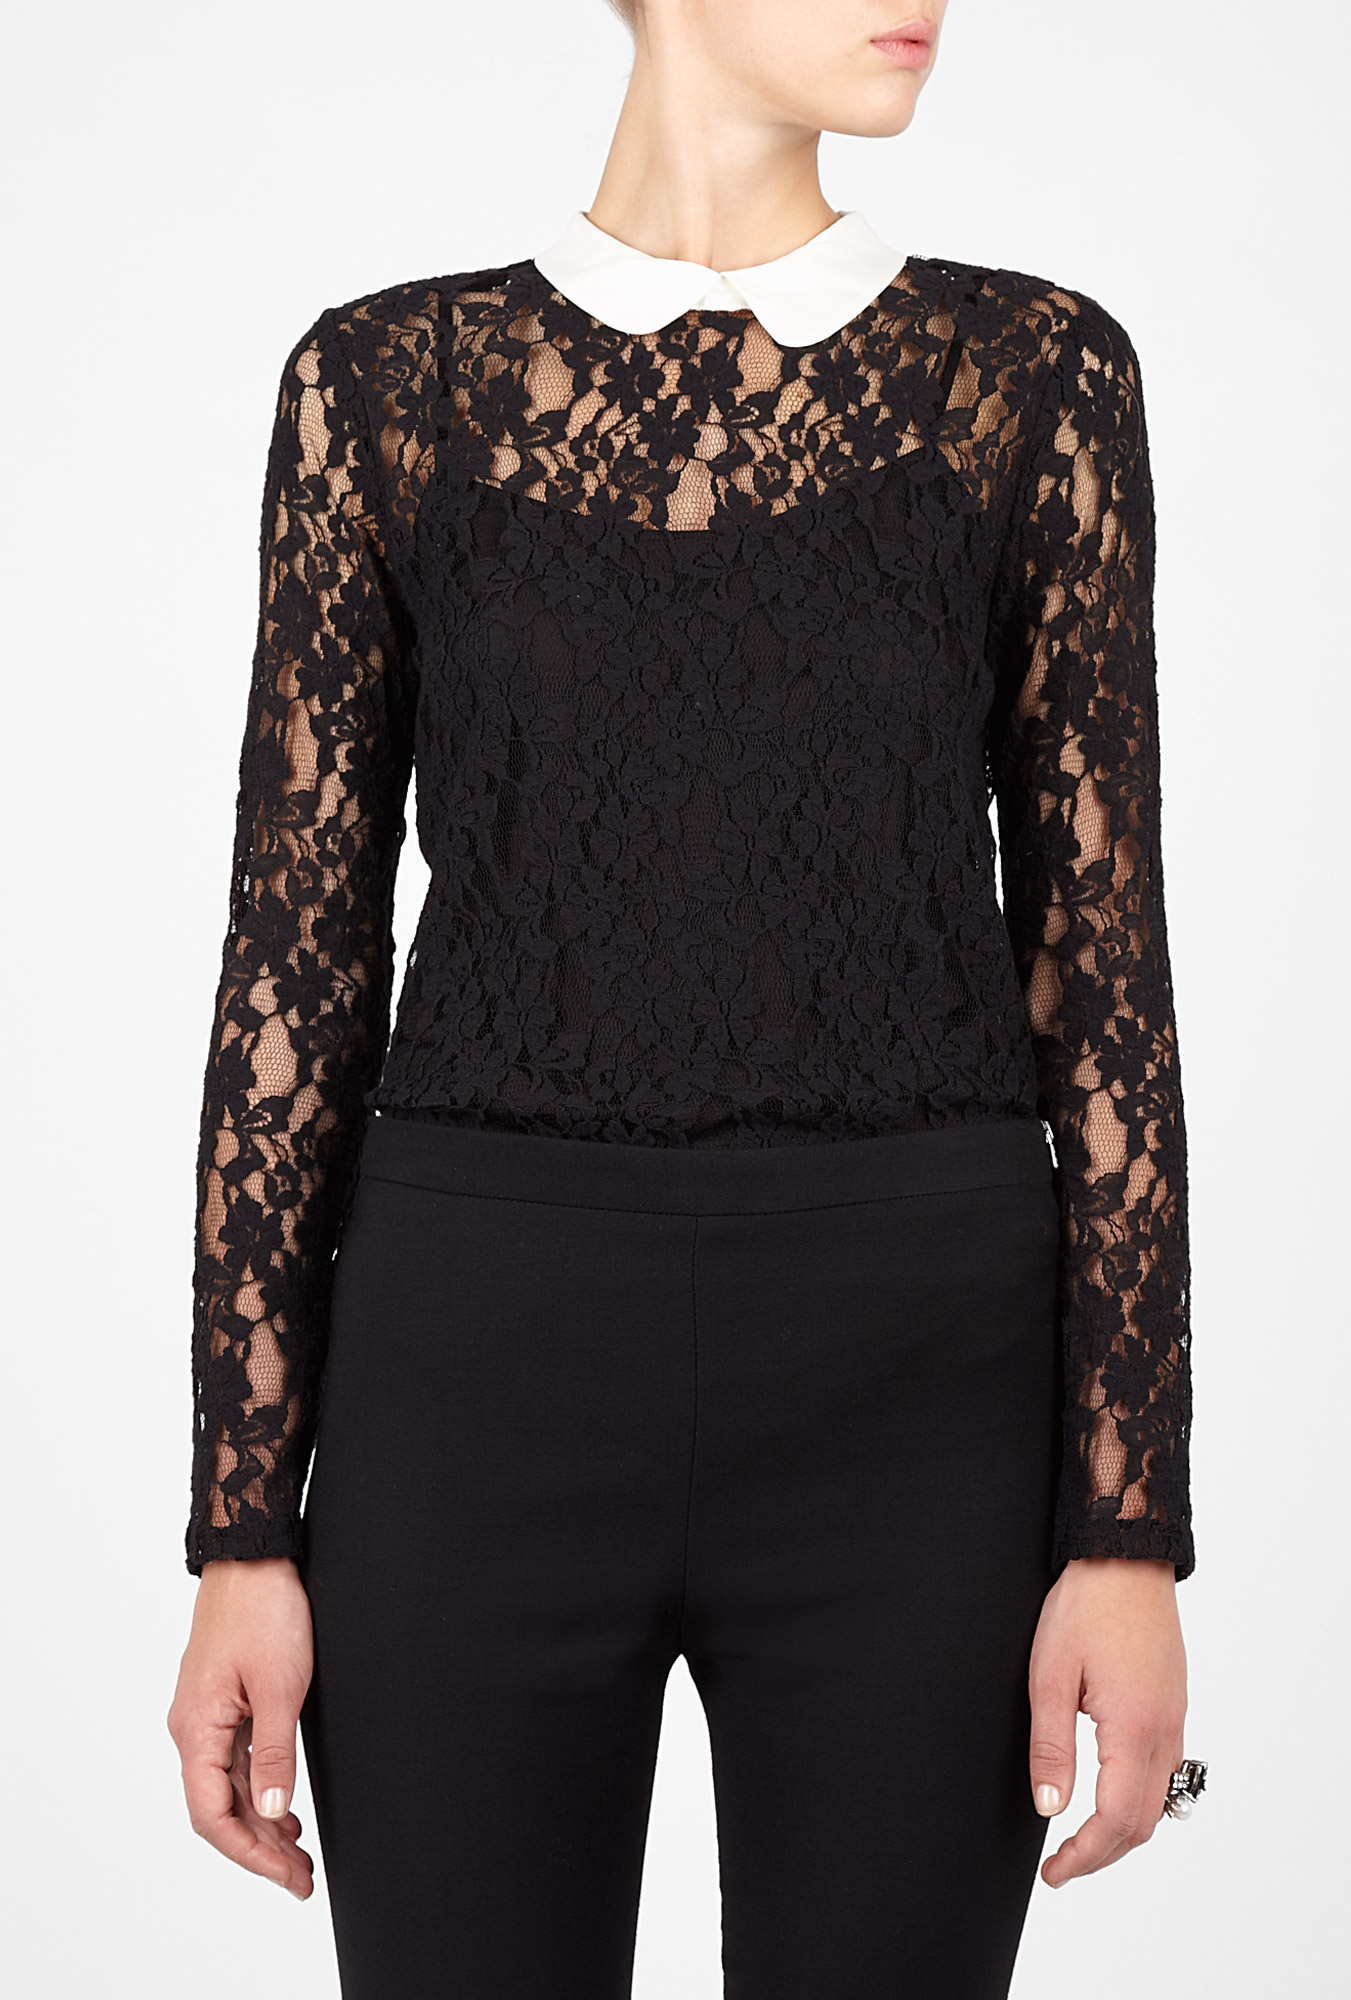 Dkny Black Lace Contrast Collar Blouse in Black | Lyst